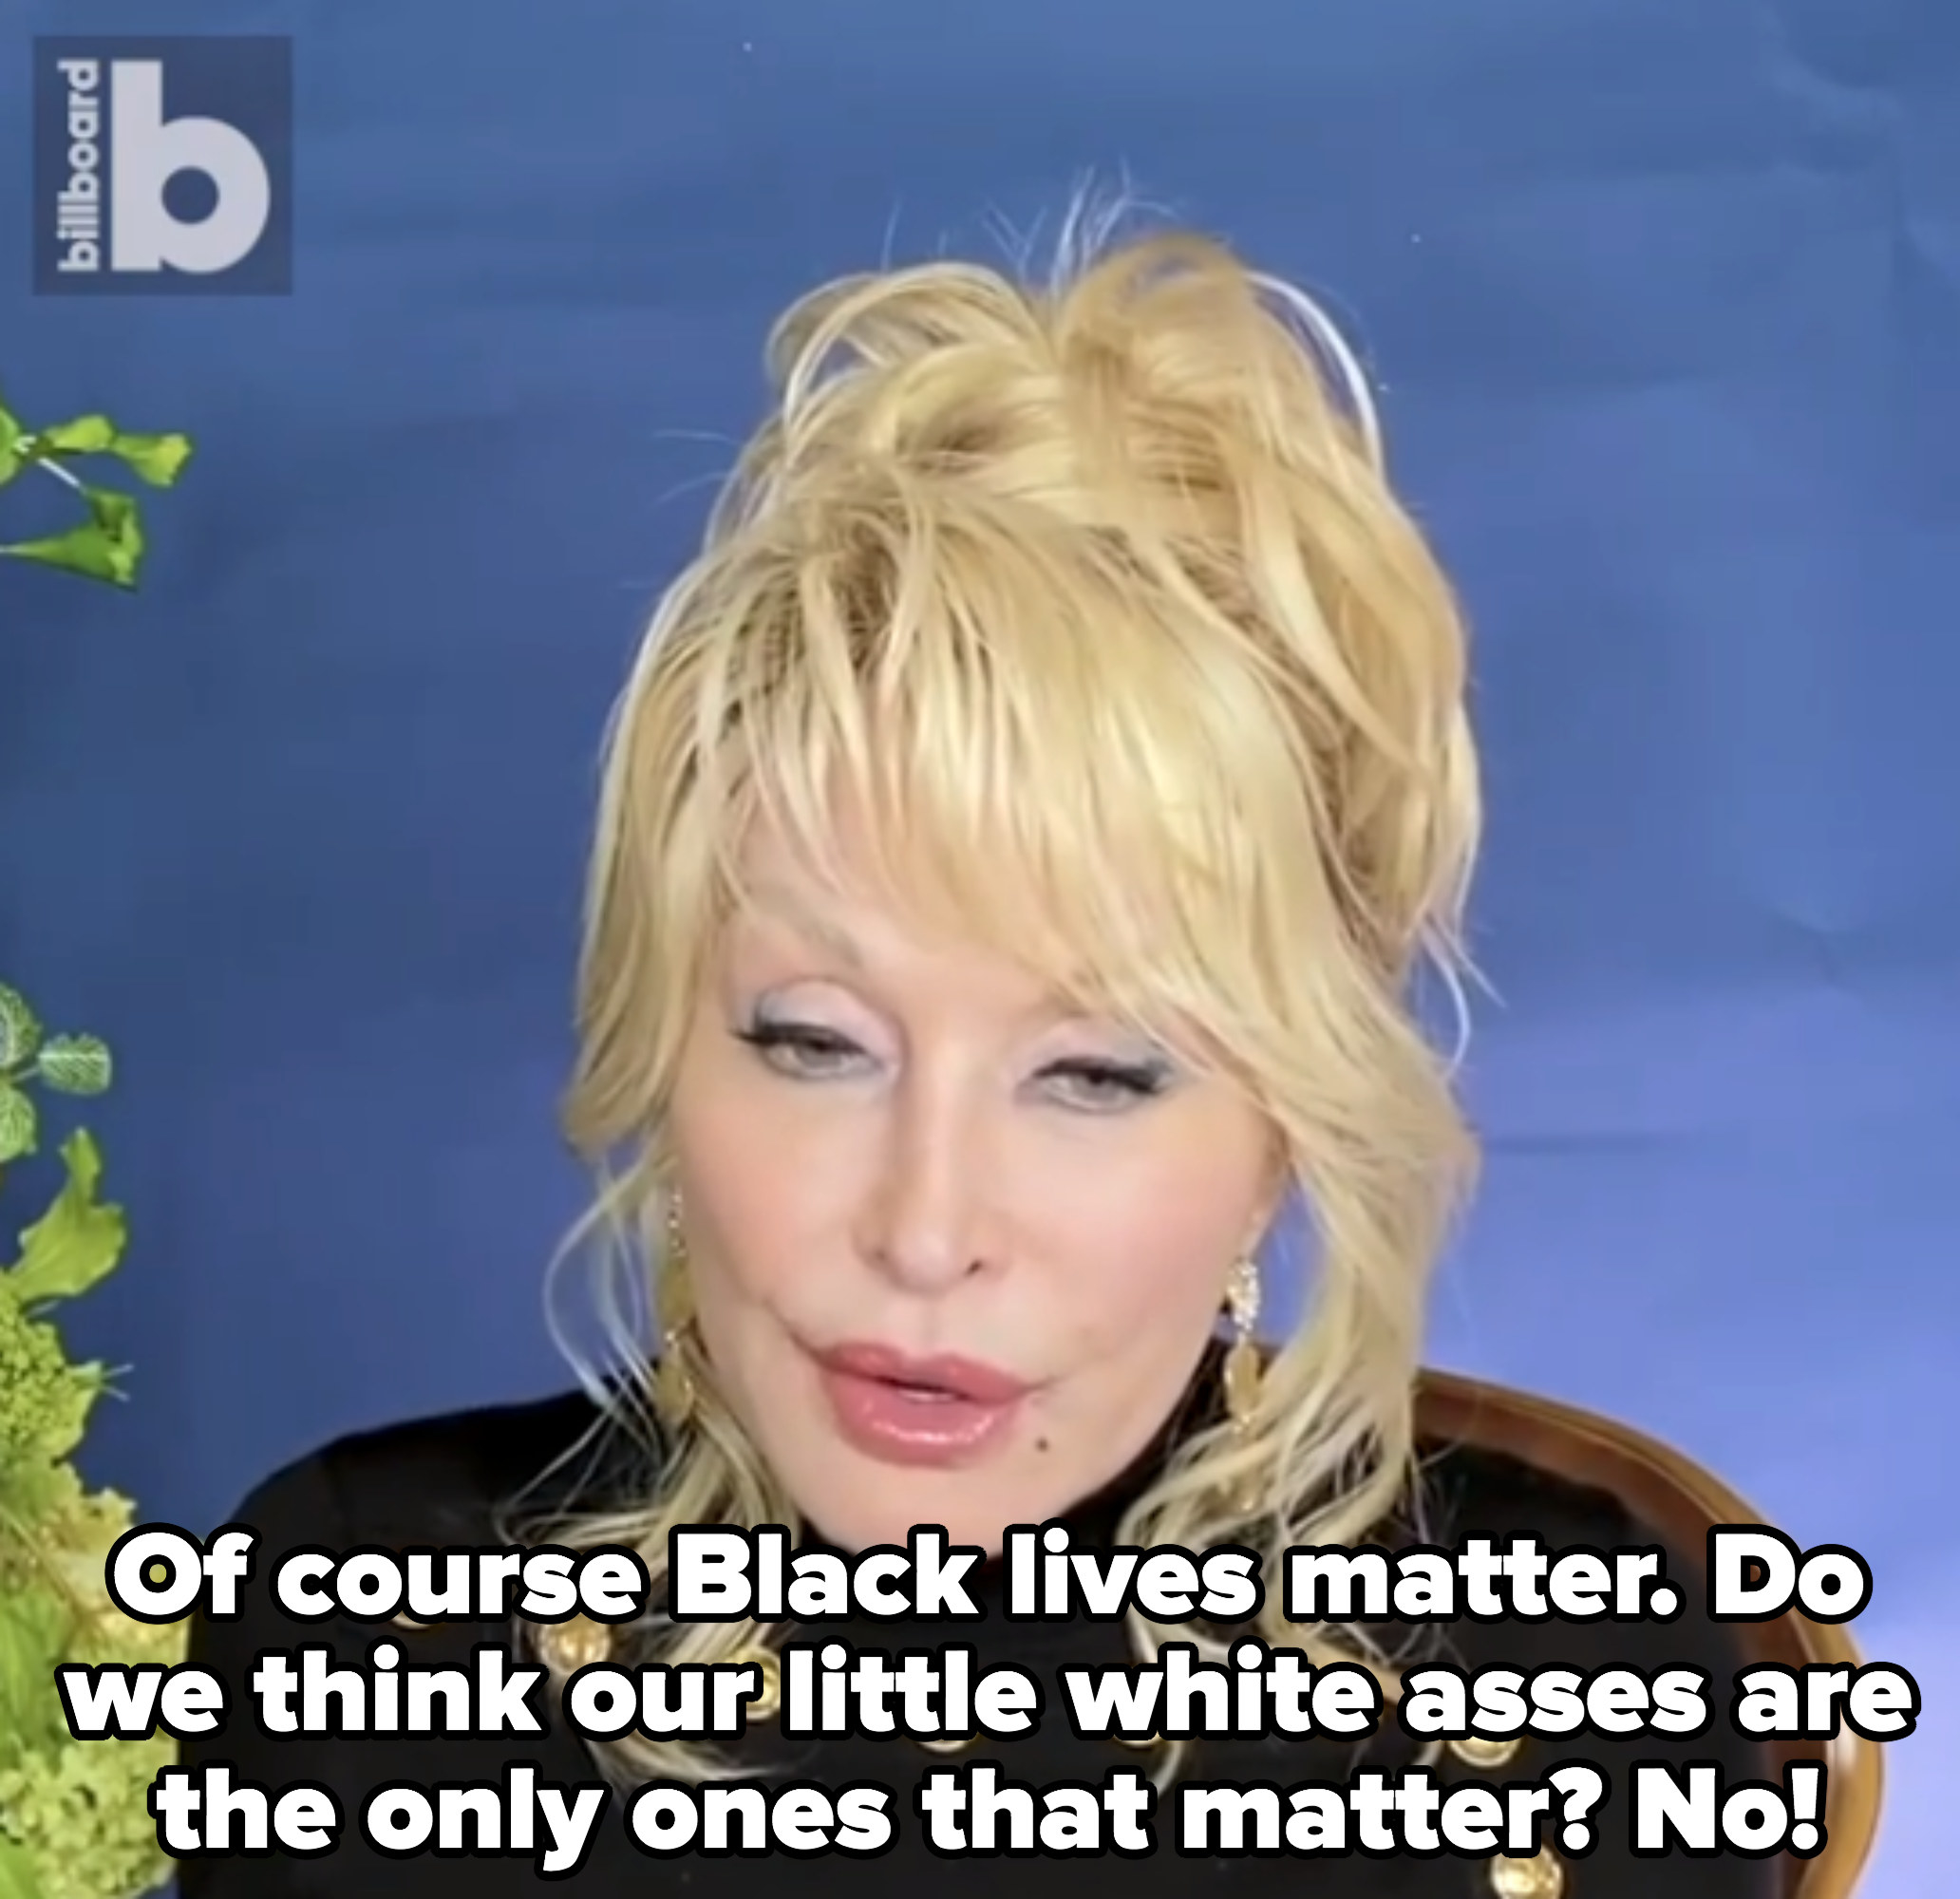 Dolly: &quot;Of course Black lives matter. Do we think our little white asses are the only ones that matter? No!&quot;